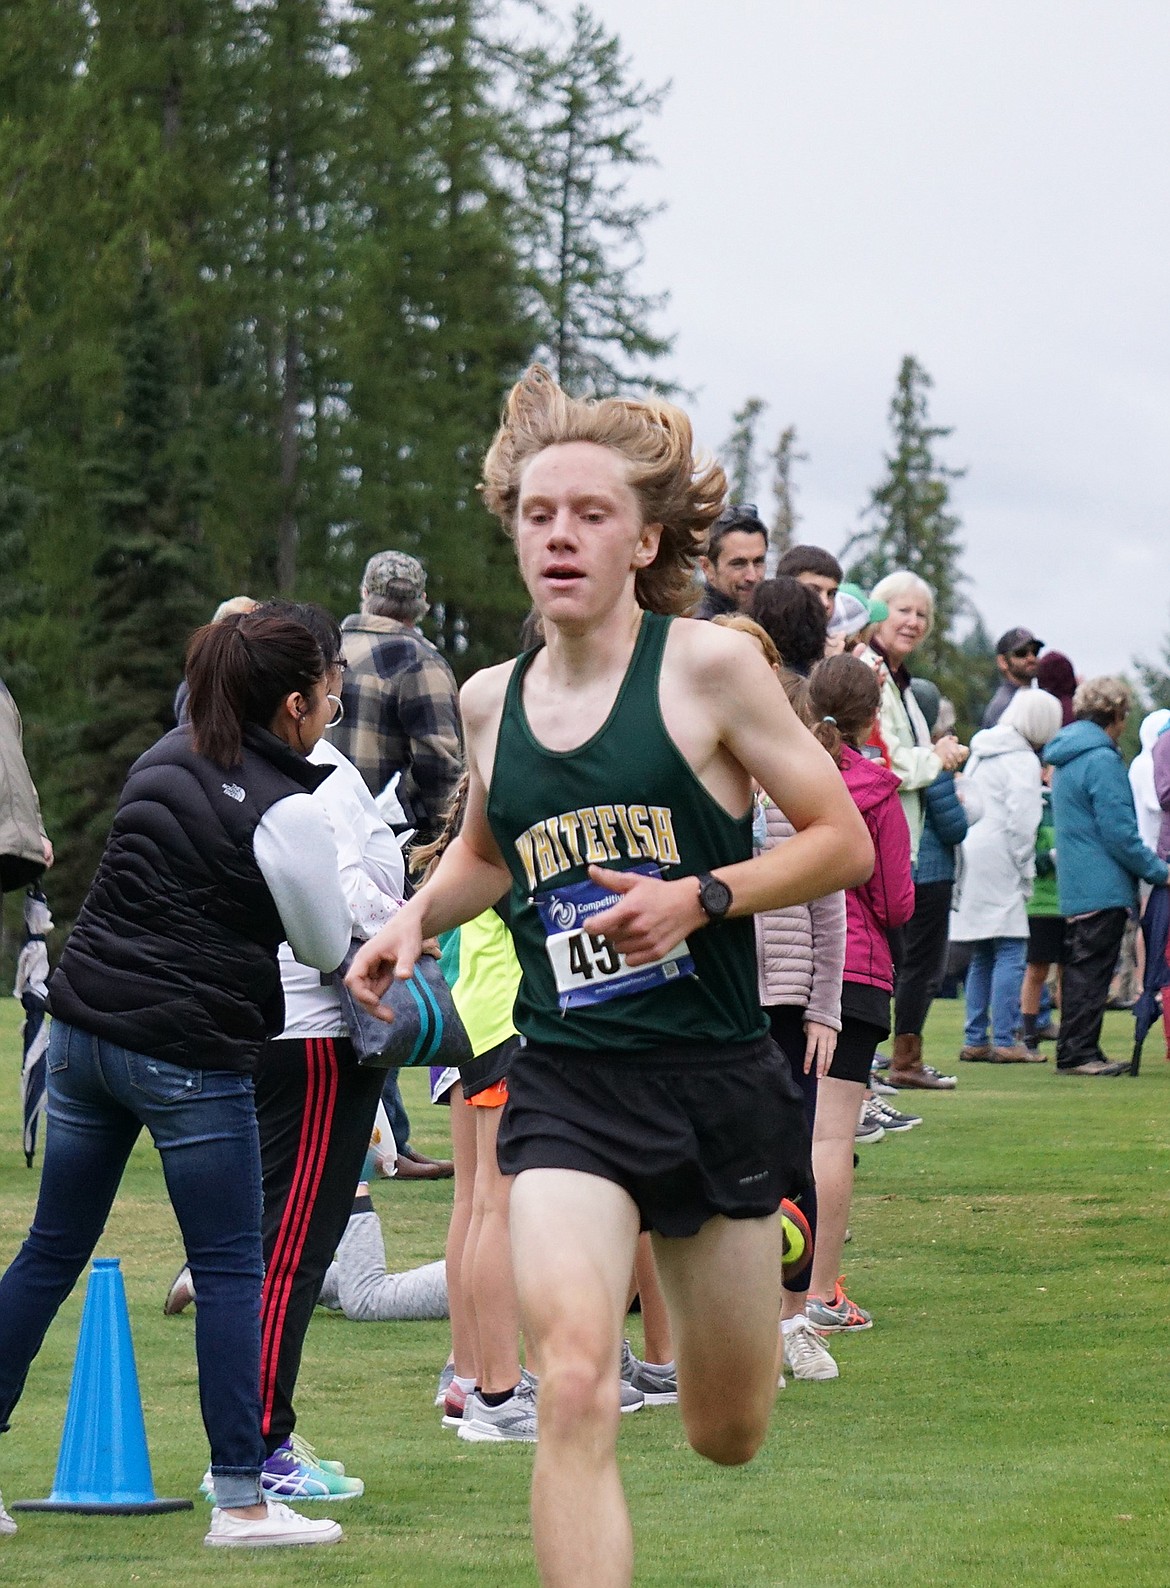 Whitefish senior Jacob Henson finishes fifth overall in the men’s 5,000 meter varsity race with a time of 17:11 at the Whitefish cross country invitational. (Matt Weller photo)